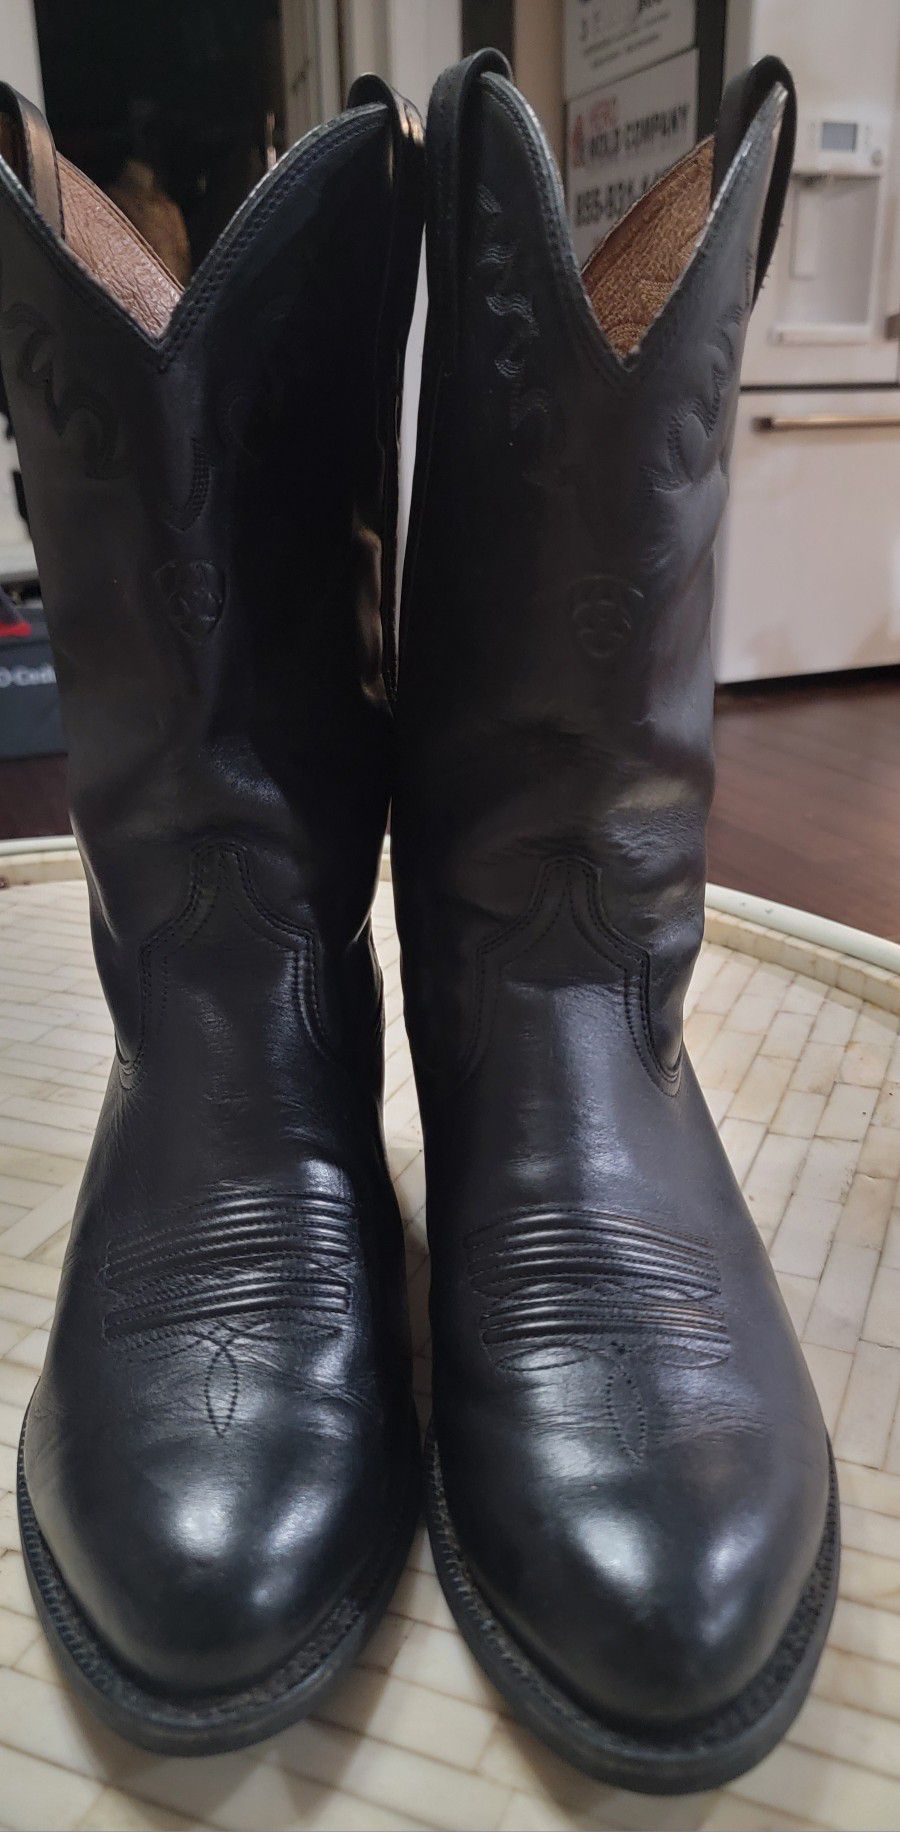 Ariat Boots Size 10.5